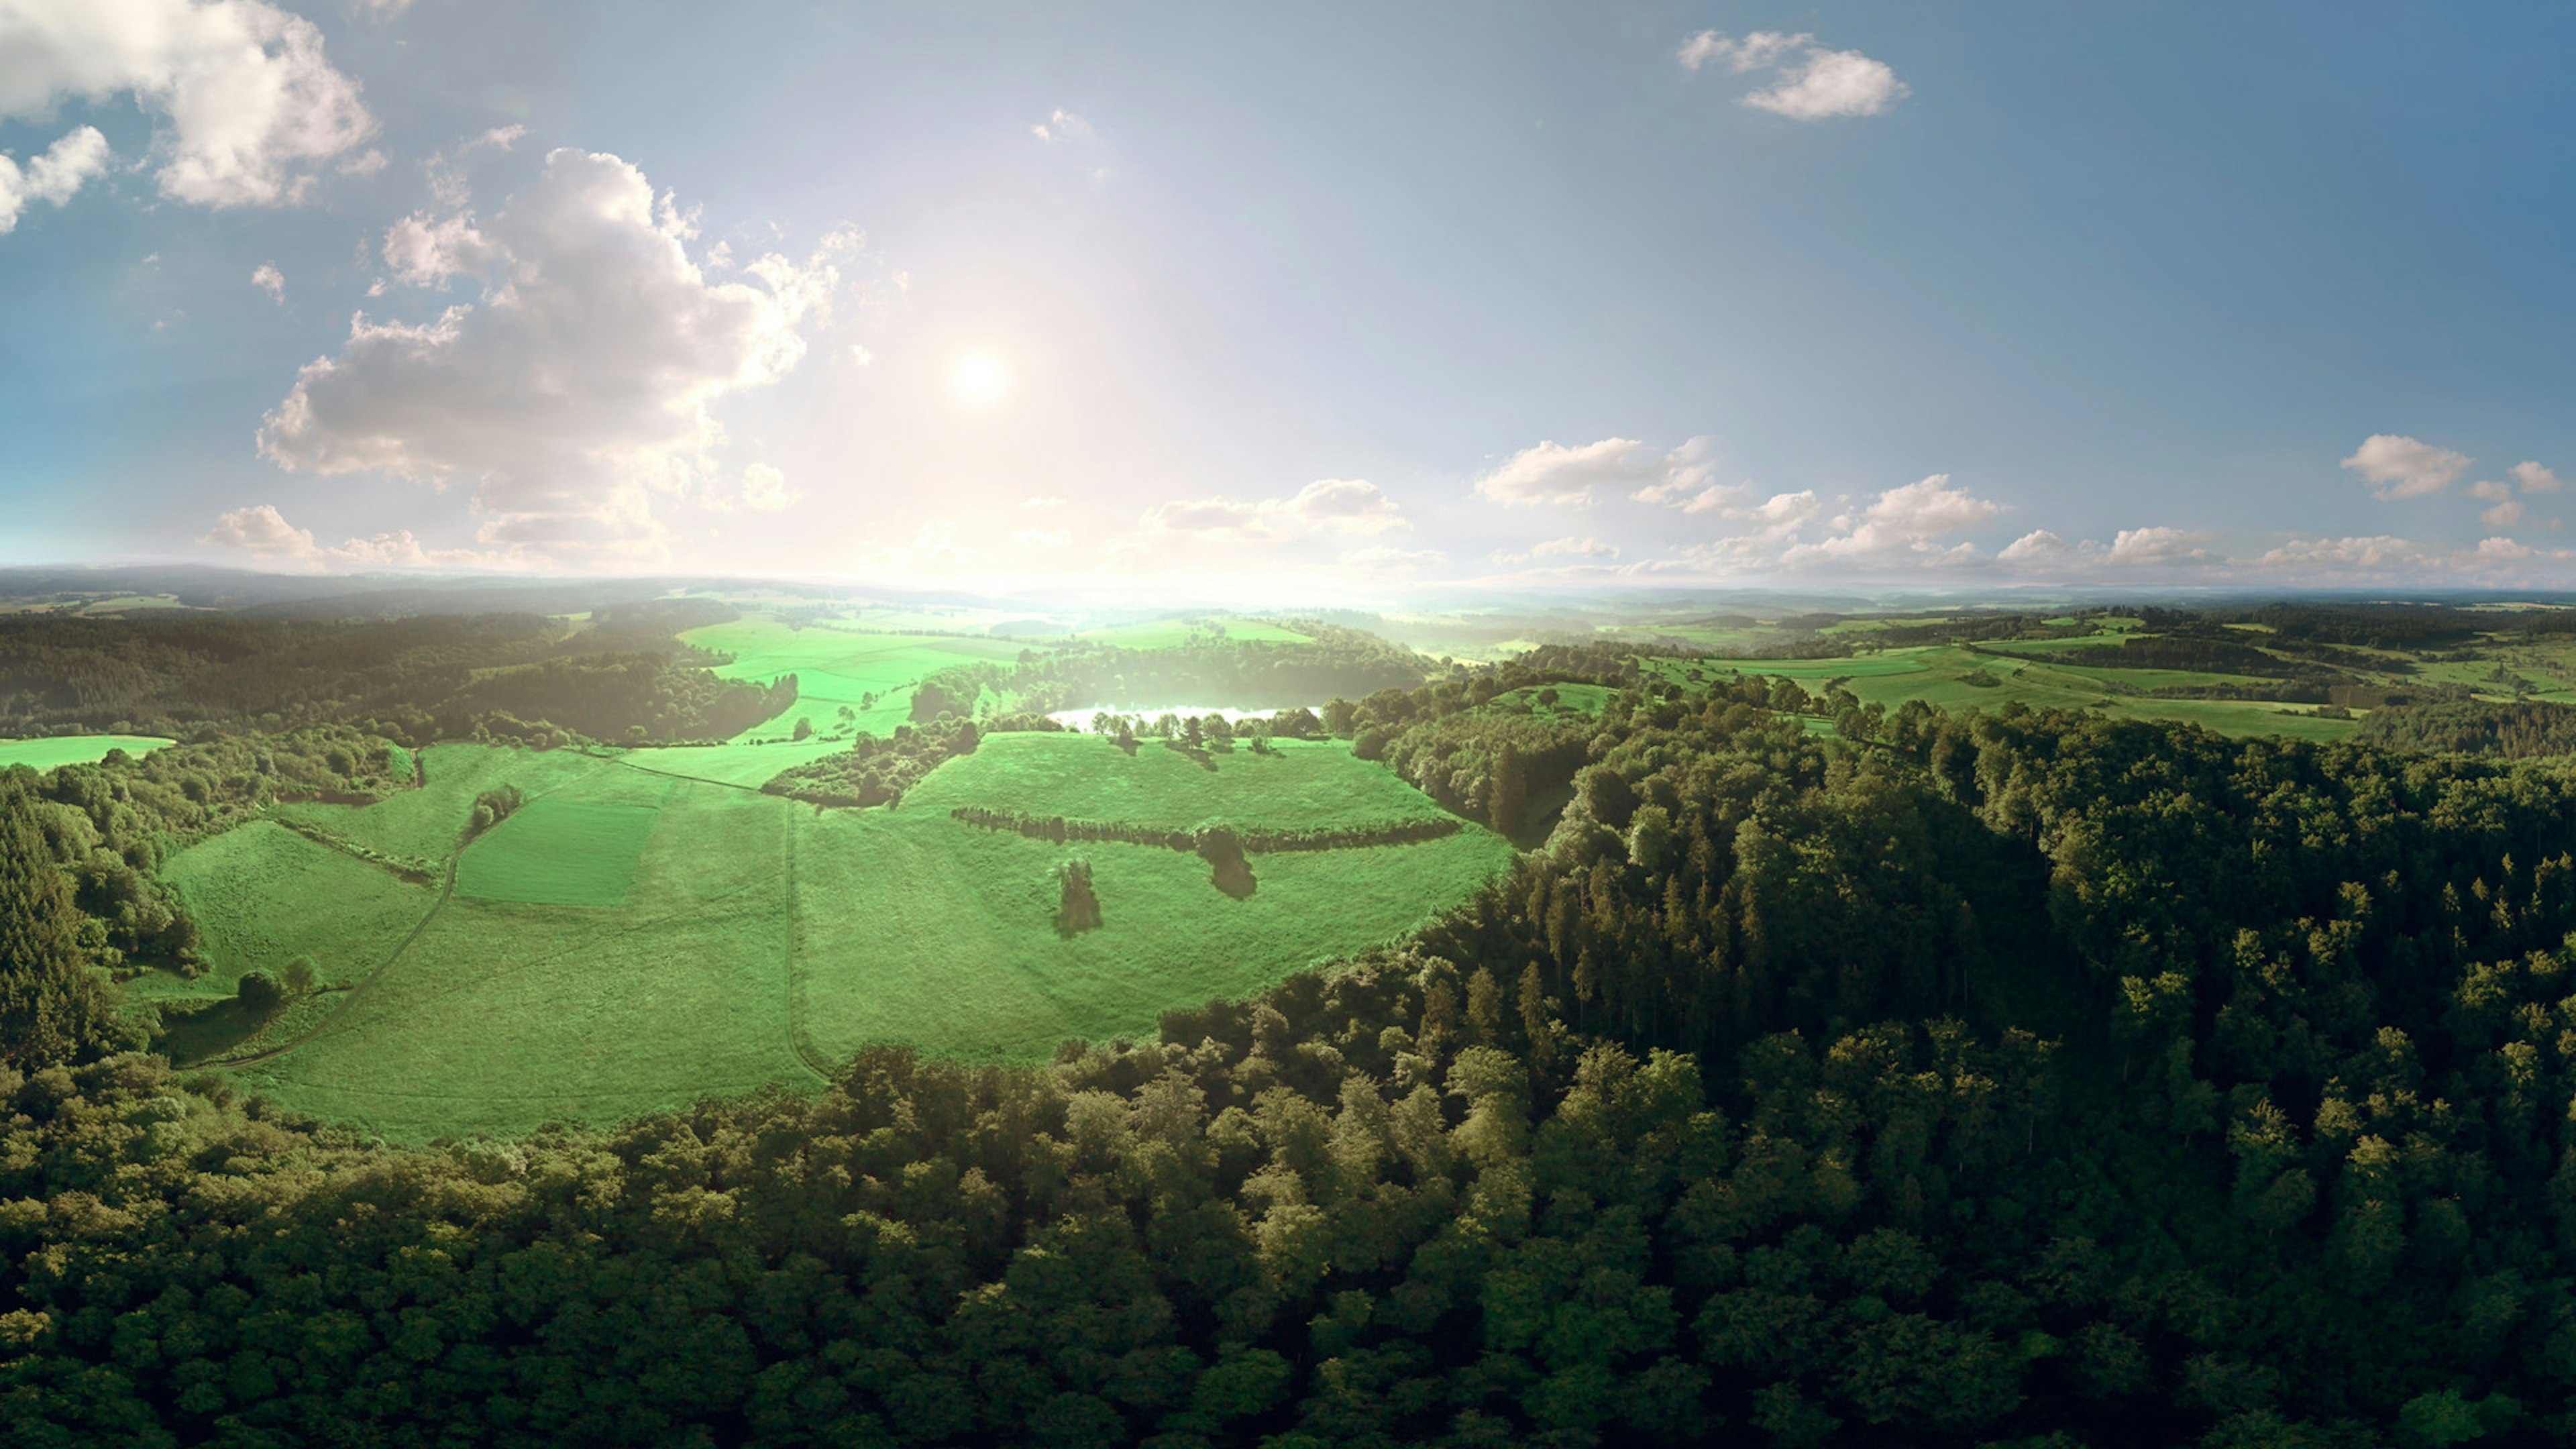 Eifel landscape with green fields, forests and a  maar. 